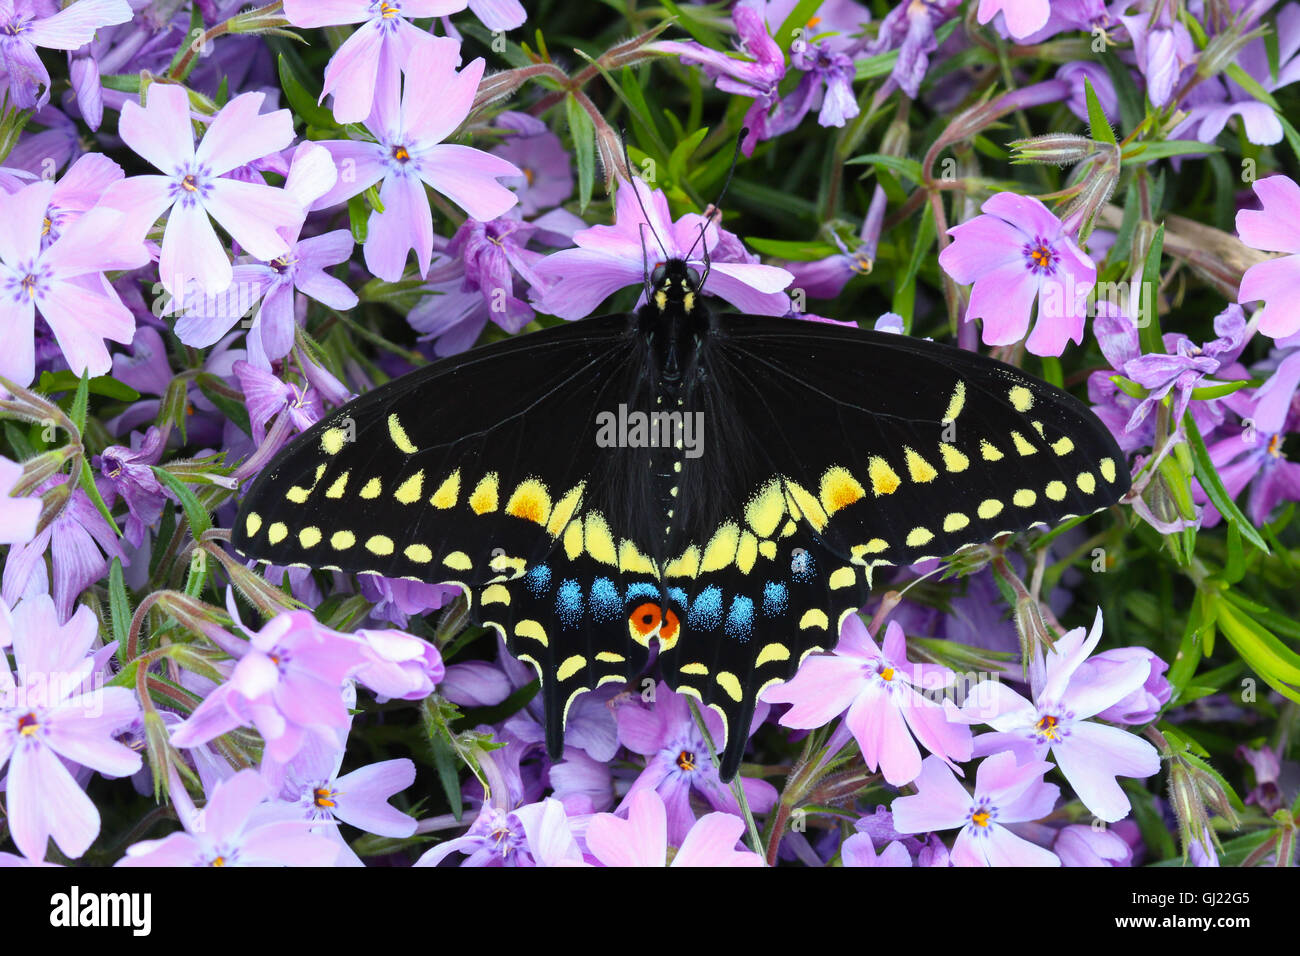 A freshly emerged male Black Swallowtail butterfly (Papilio polyxenes) resting on phlox flowers (Phlox sp.), Indiana, USA Stock Photo